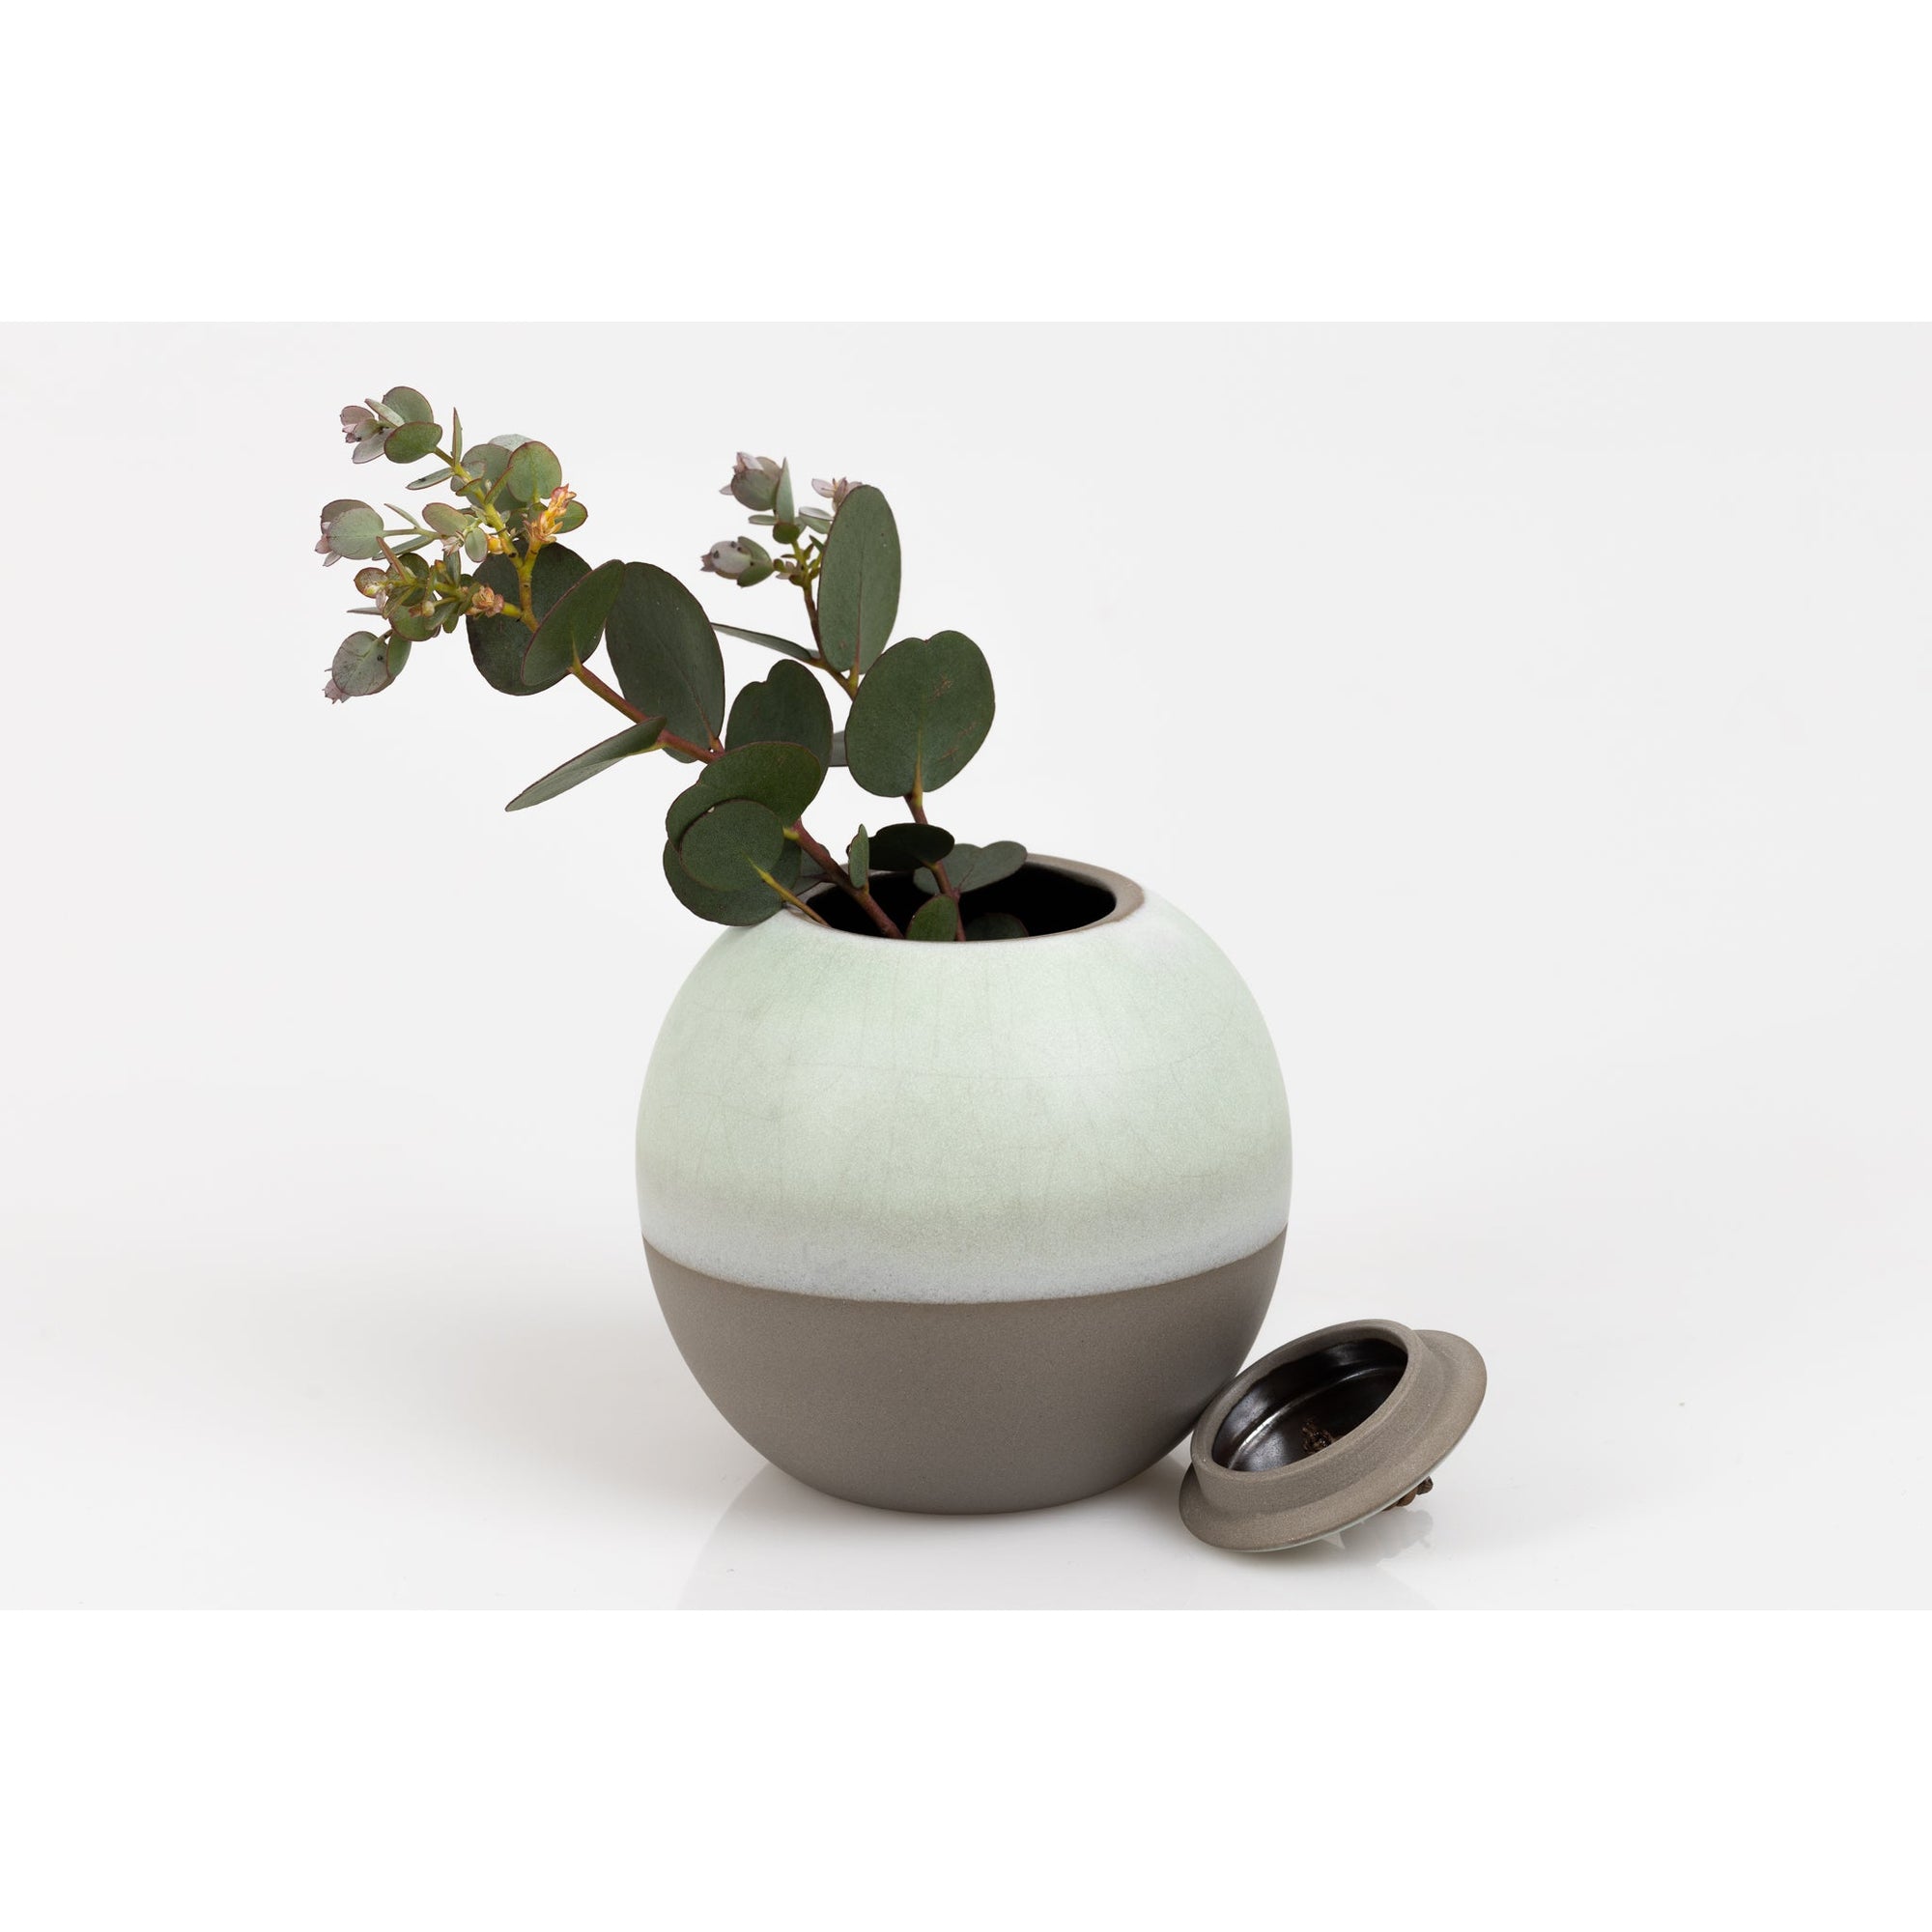 KSF2 Lunar, Stoneware Sphere Pot by Kate Schuricht, available at Padstow Gallery, Cornwall